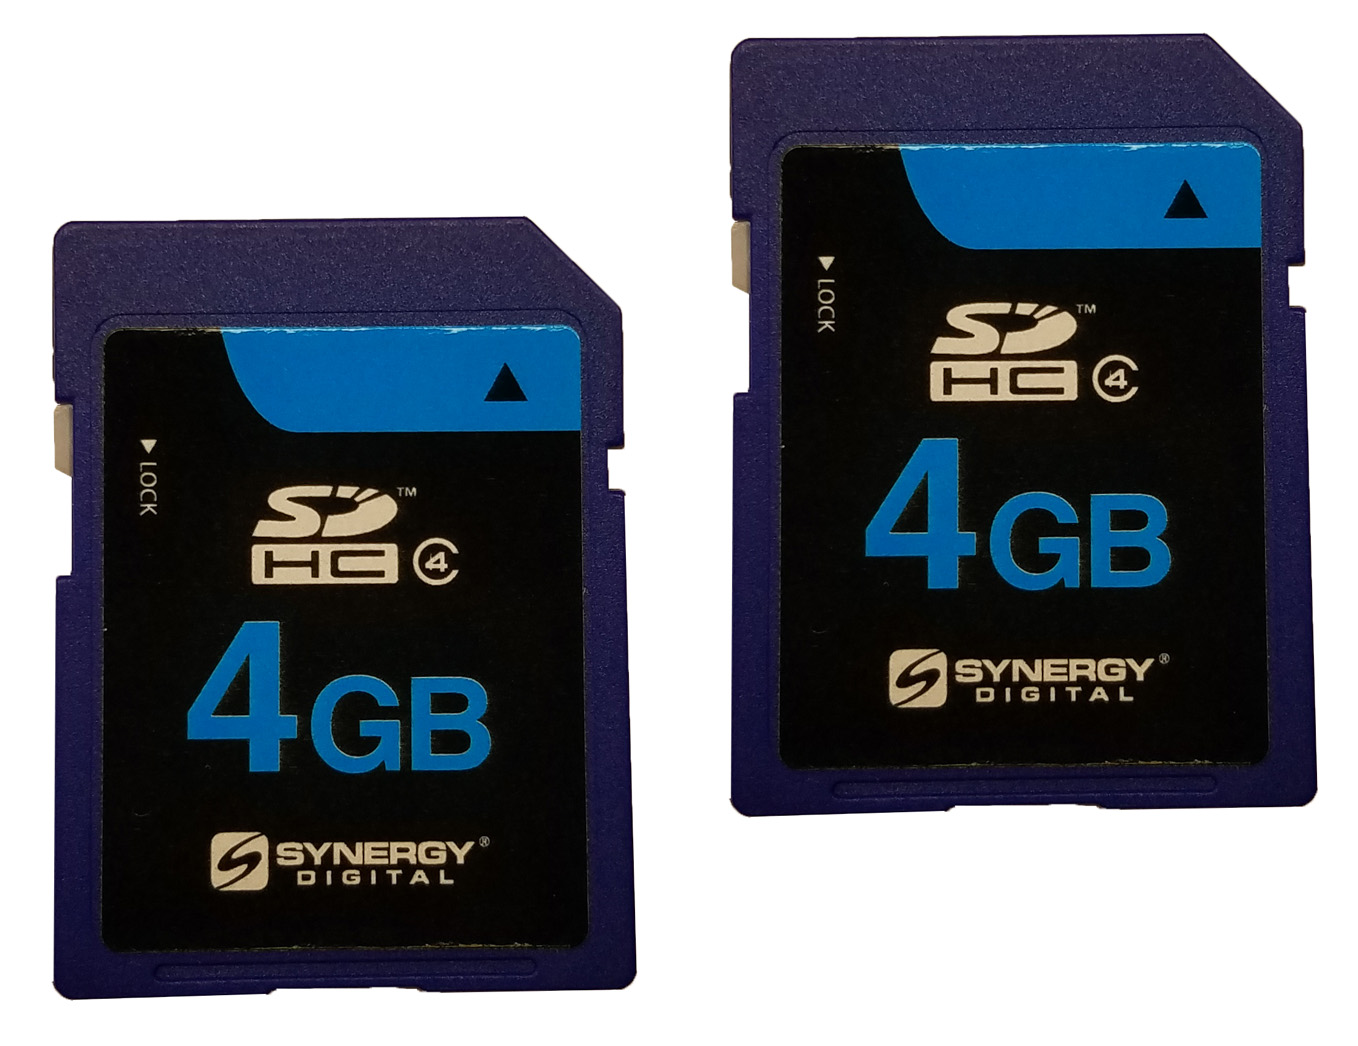 2 x 4GB Secure Digital High Capacity (SDHC) Memory Cards (1 Twin Pack)